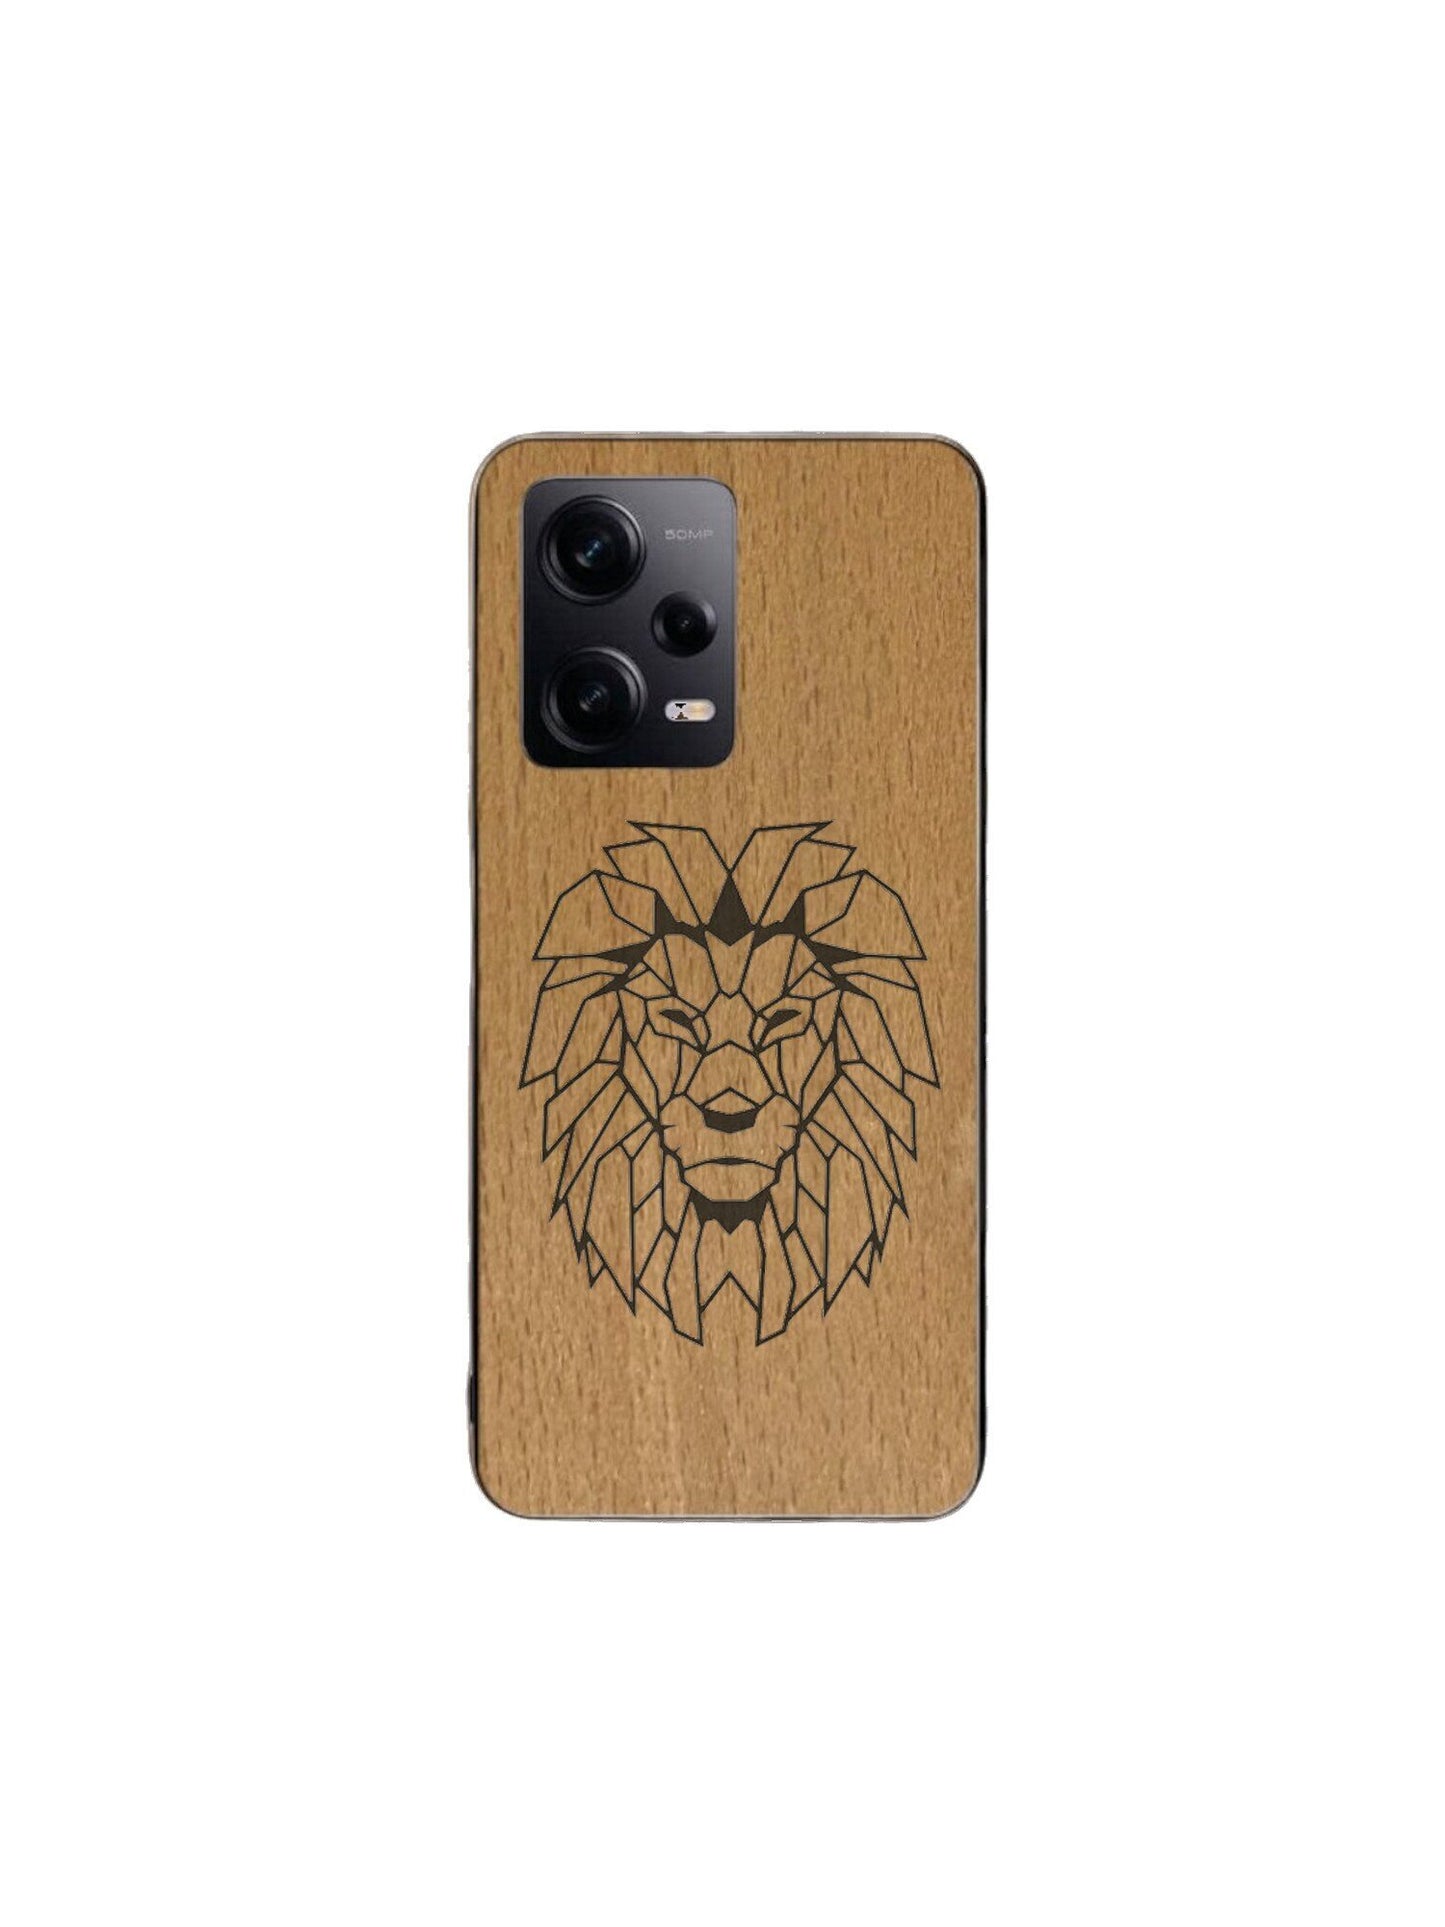 Oppo Find case - Lion engraving